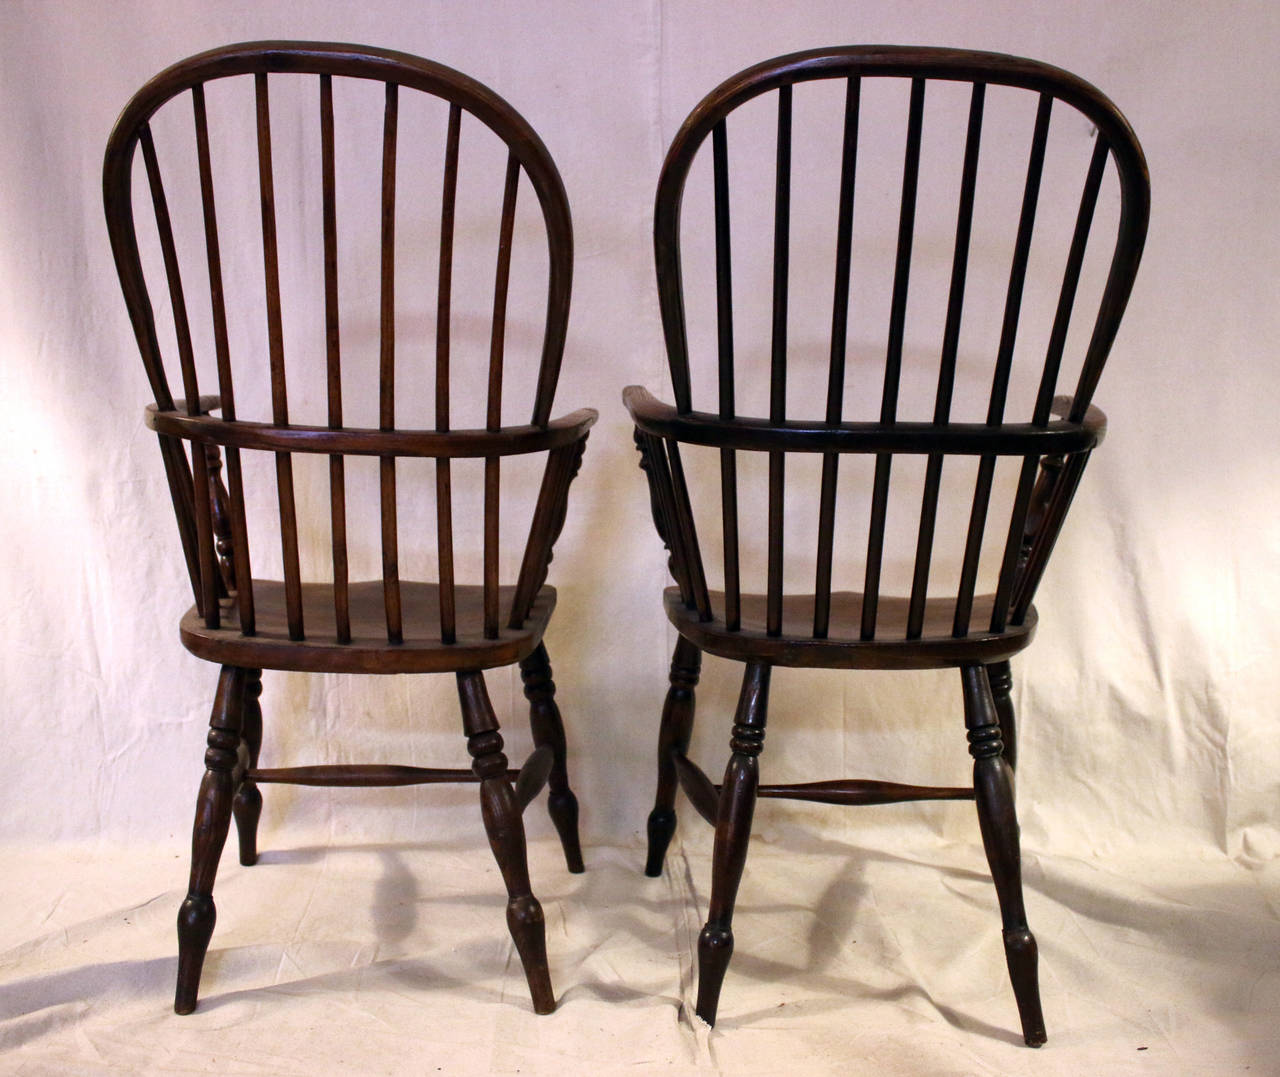 An assembled set of eight high backed, comb back Windsor’s featuring curved arms and splayed turned legs joined by stretchers. All have seven spindles at top and 15 below. There are a couple of very subtle differences in the turnings of the